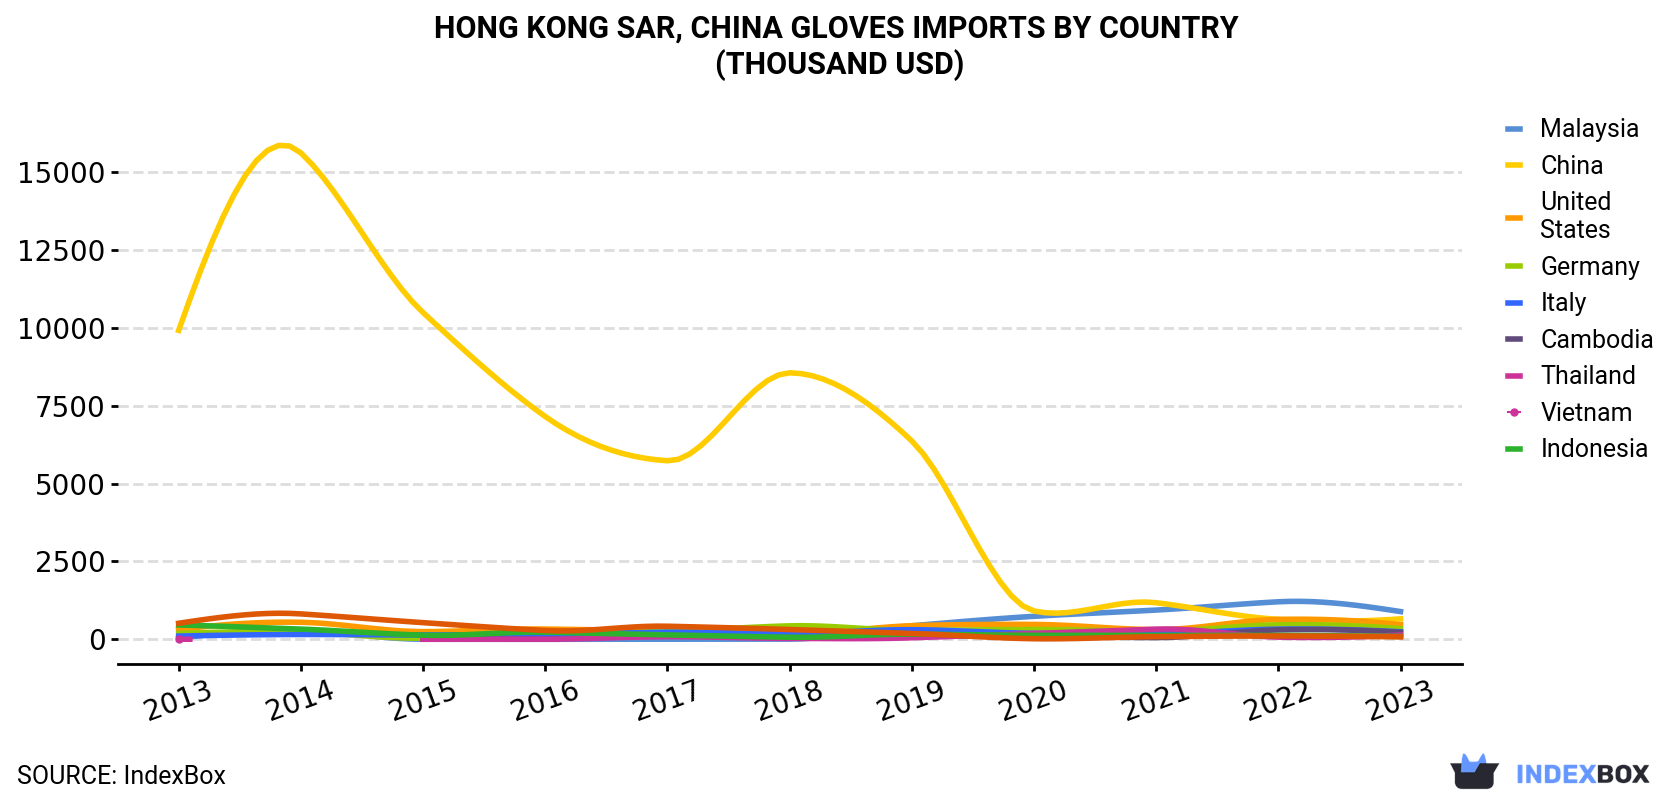 Hong Kong Gloves Imports By Country (Thousand USD)